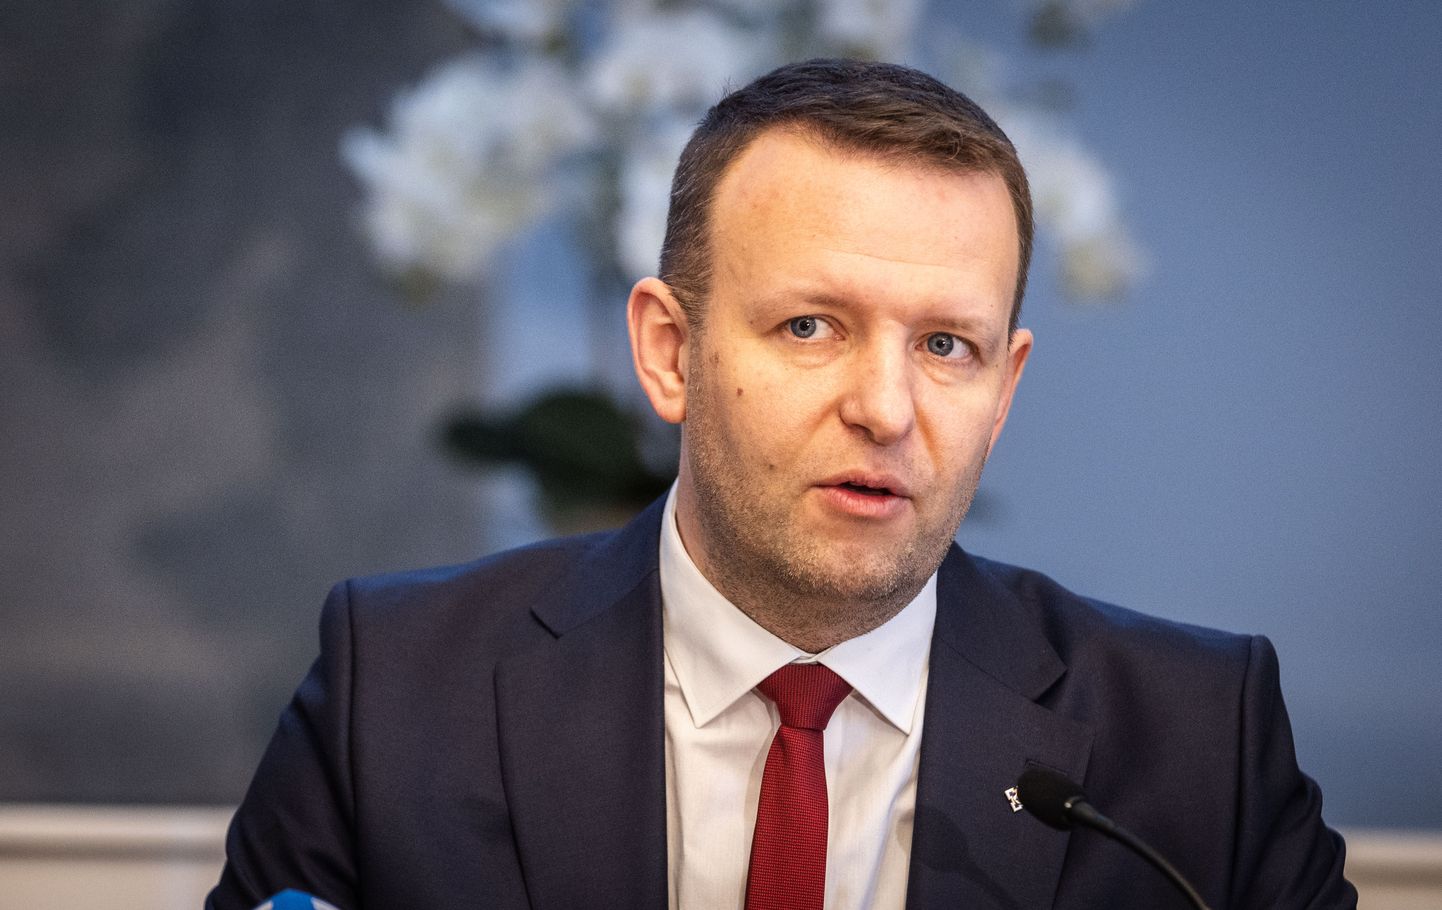 Estonia's Interior Minister Lauri Laanemets said that he will propose to the Riigikogu declaring the Moscow-based Orthodox church body, the Patriarchate of Moscow, a terrorist organization so that its activities can be banned in Estonia.